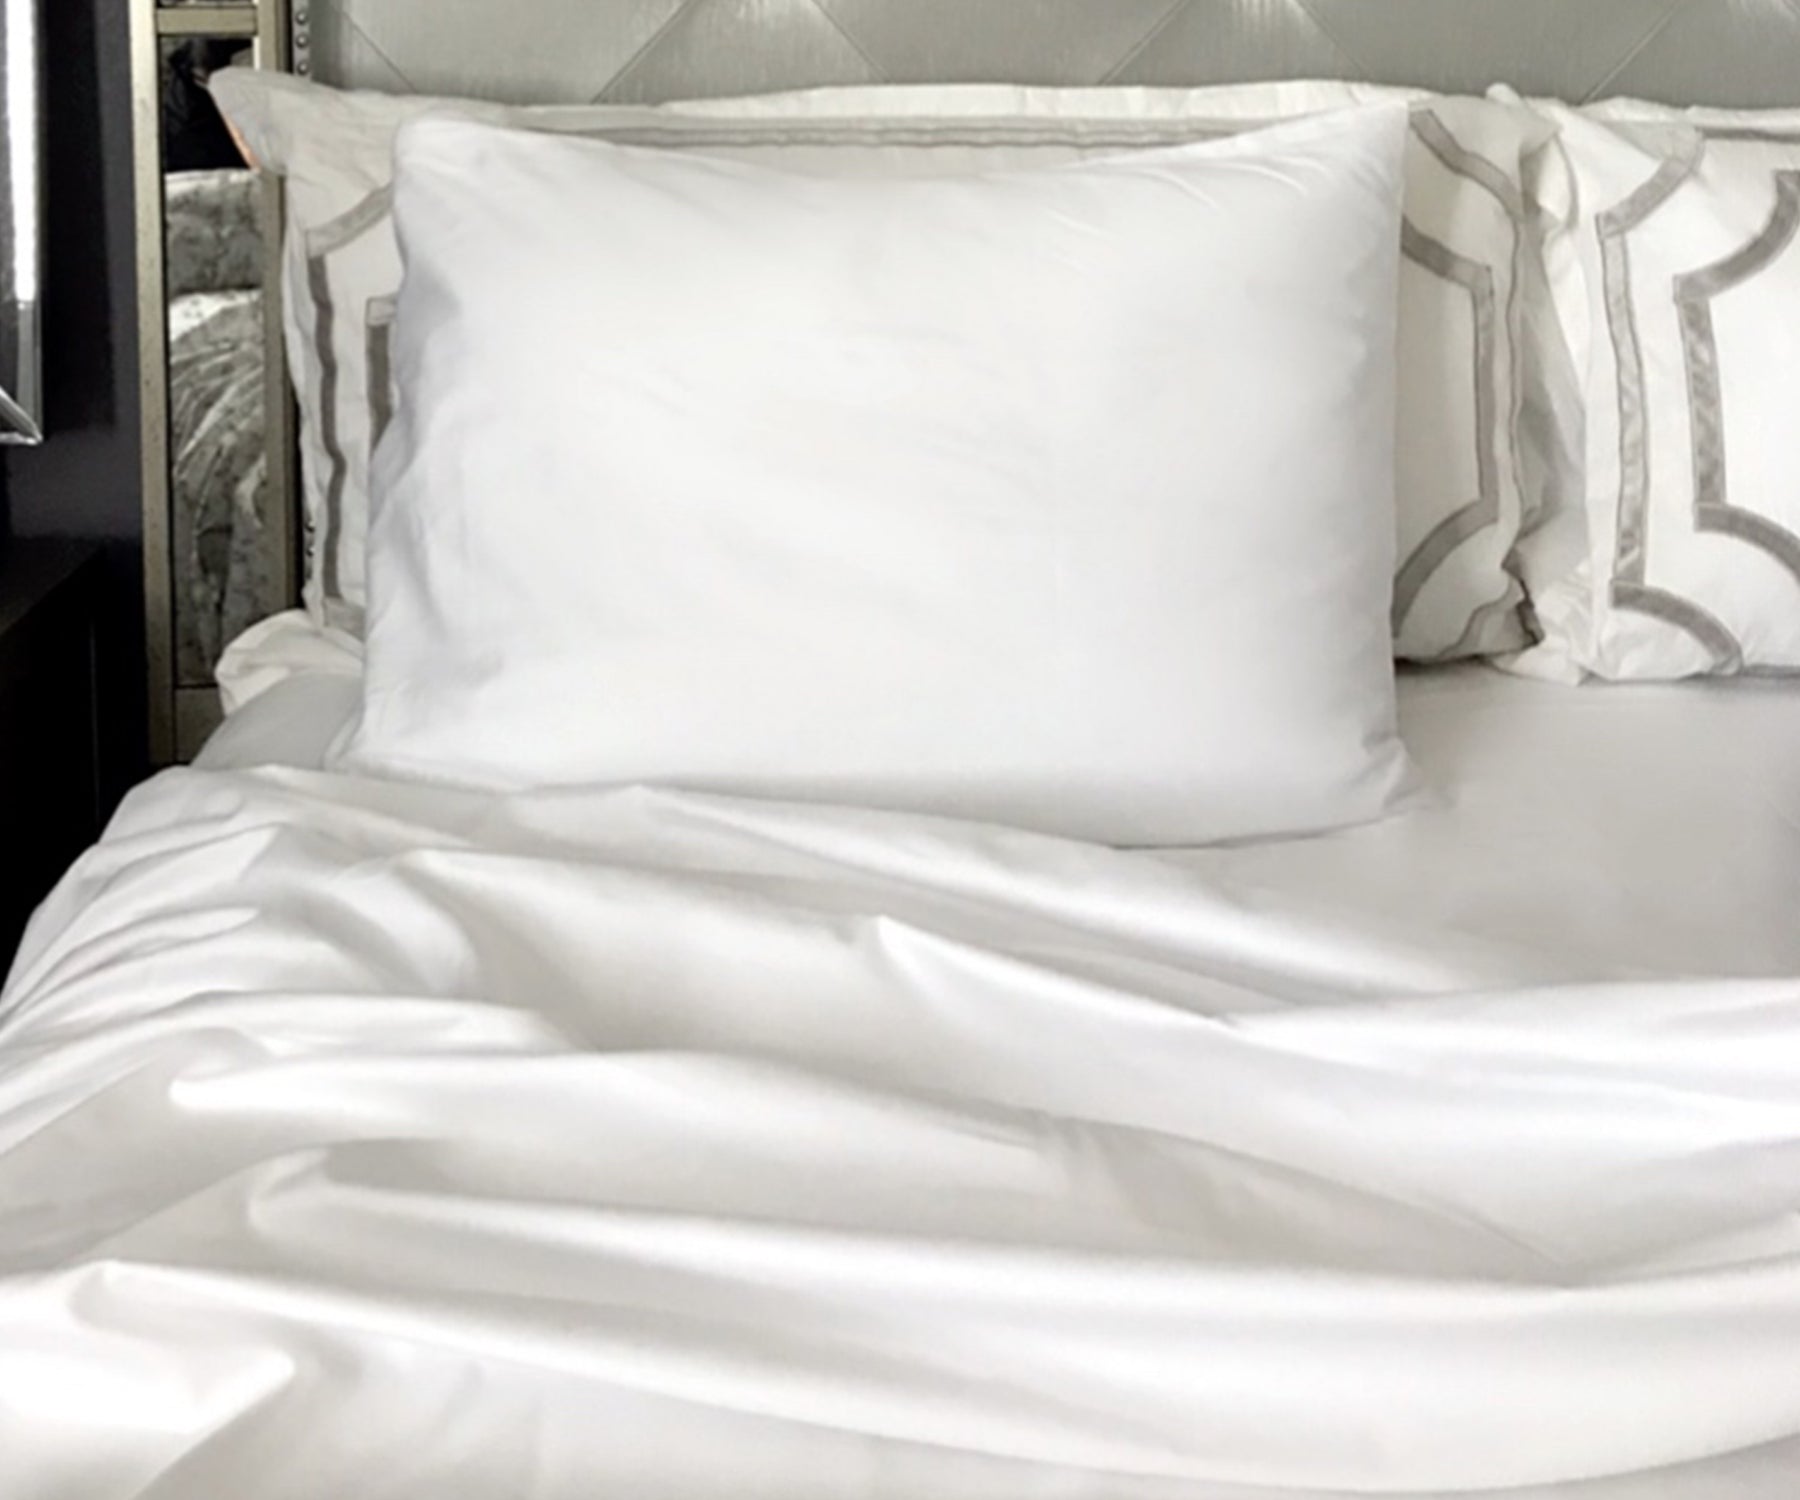 Queen-sized fitted sheet, perfectly tailored to fit your mattress for a snug fit.